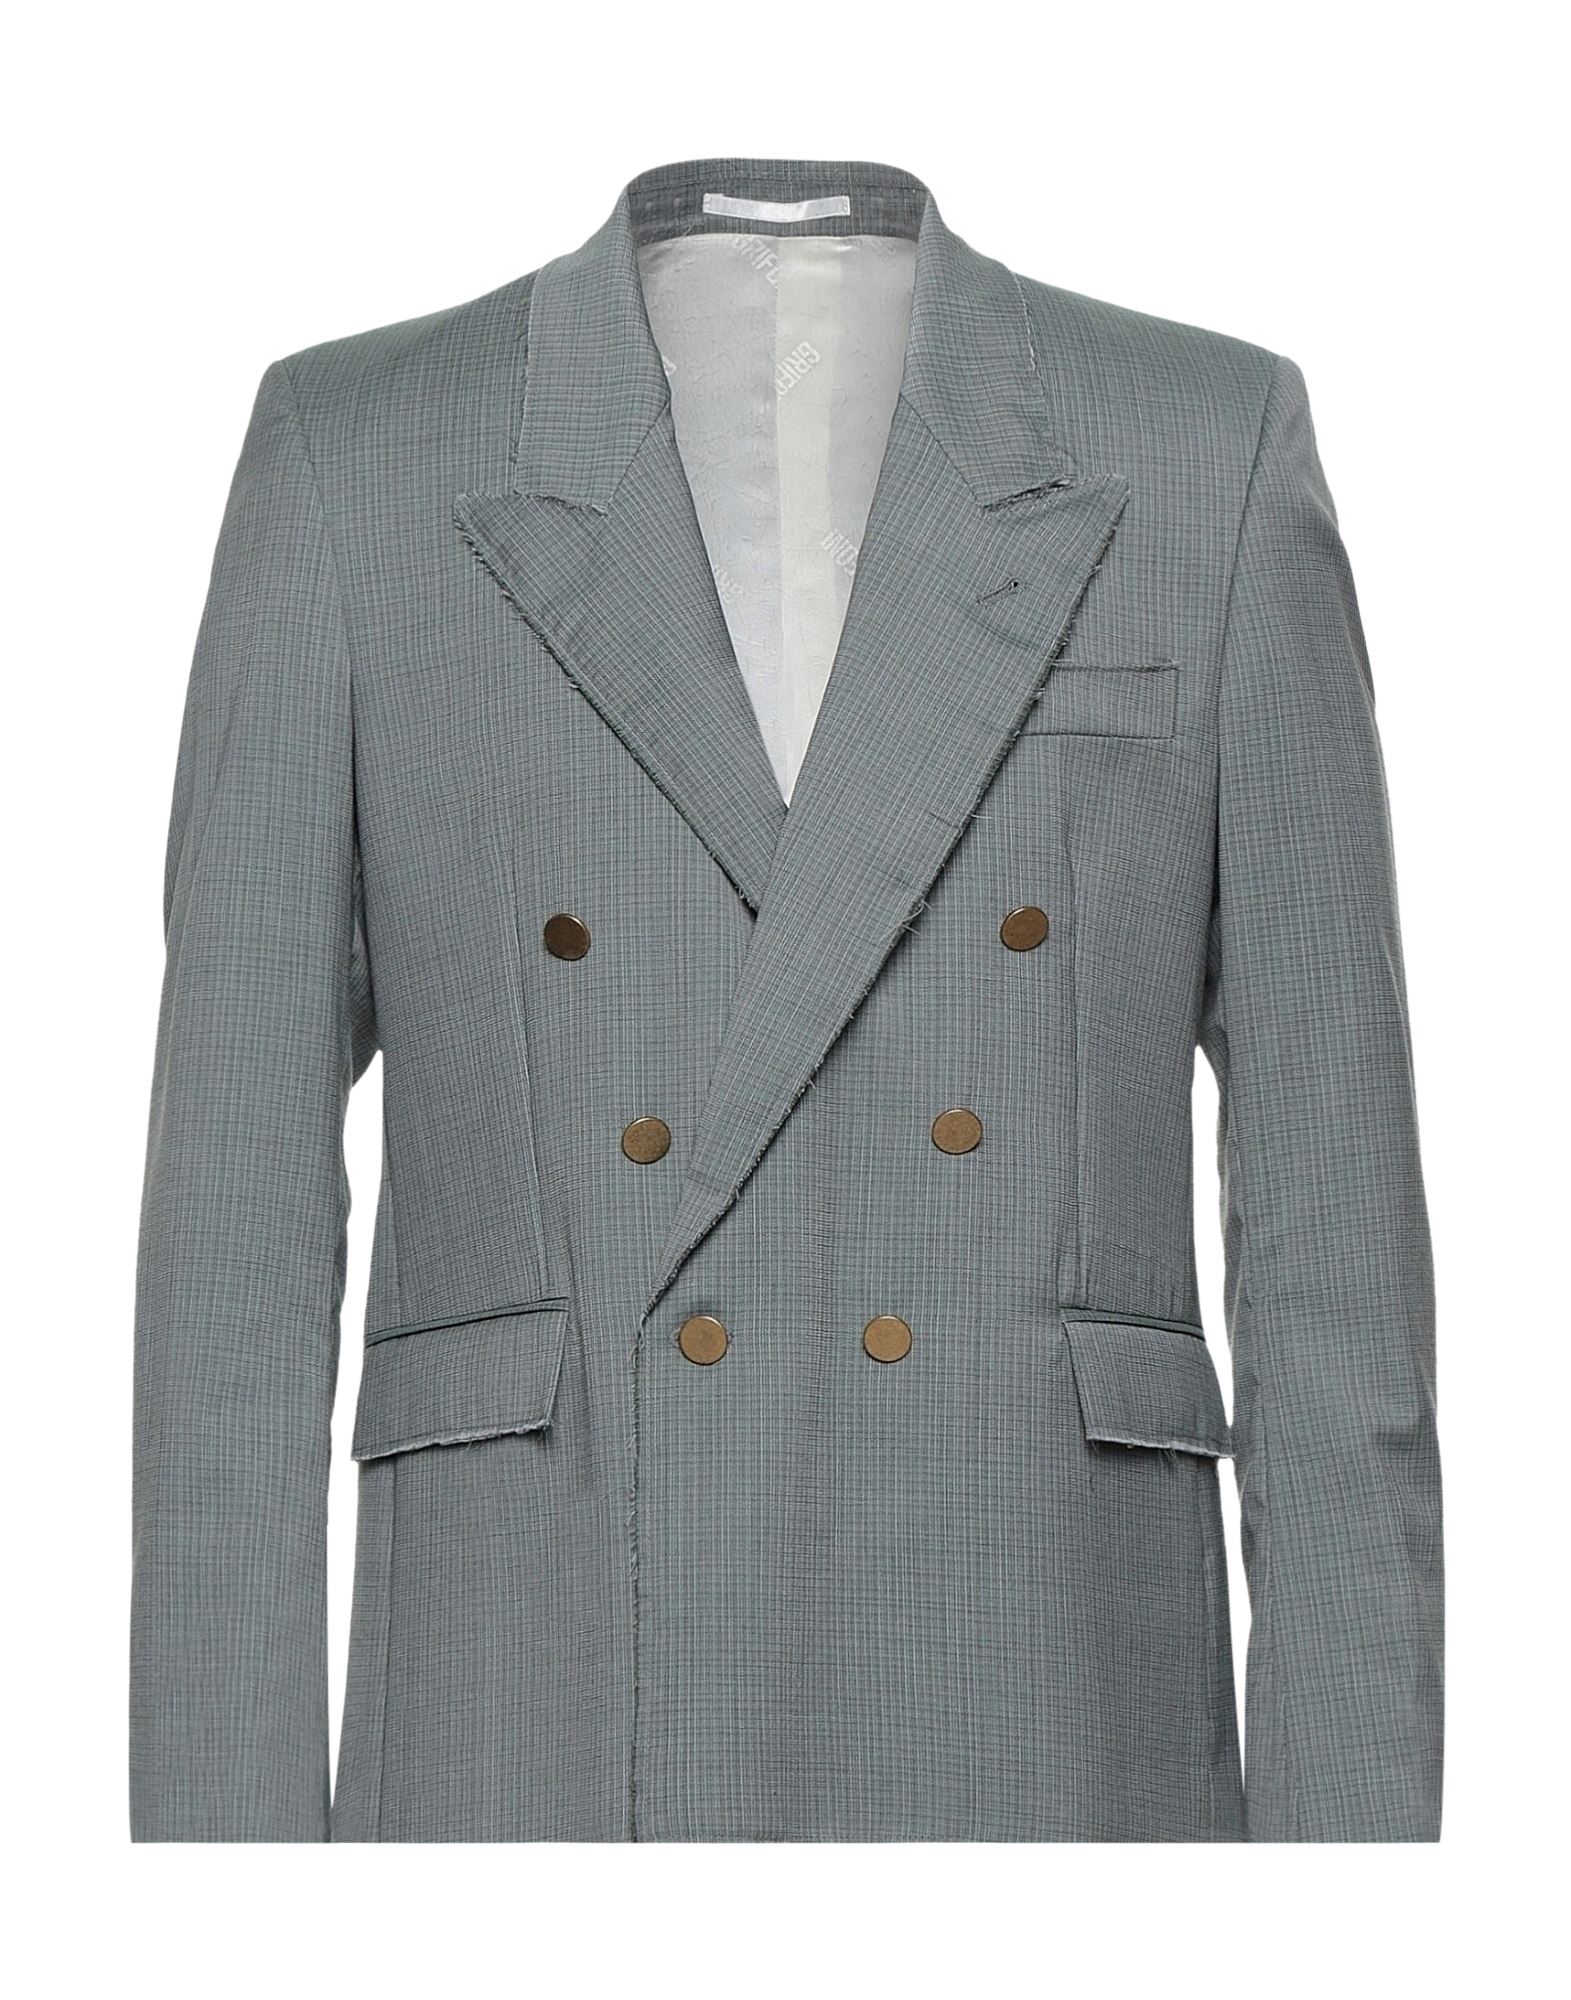 Mauro Grifoni Suit Jackets In Blue